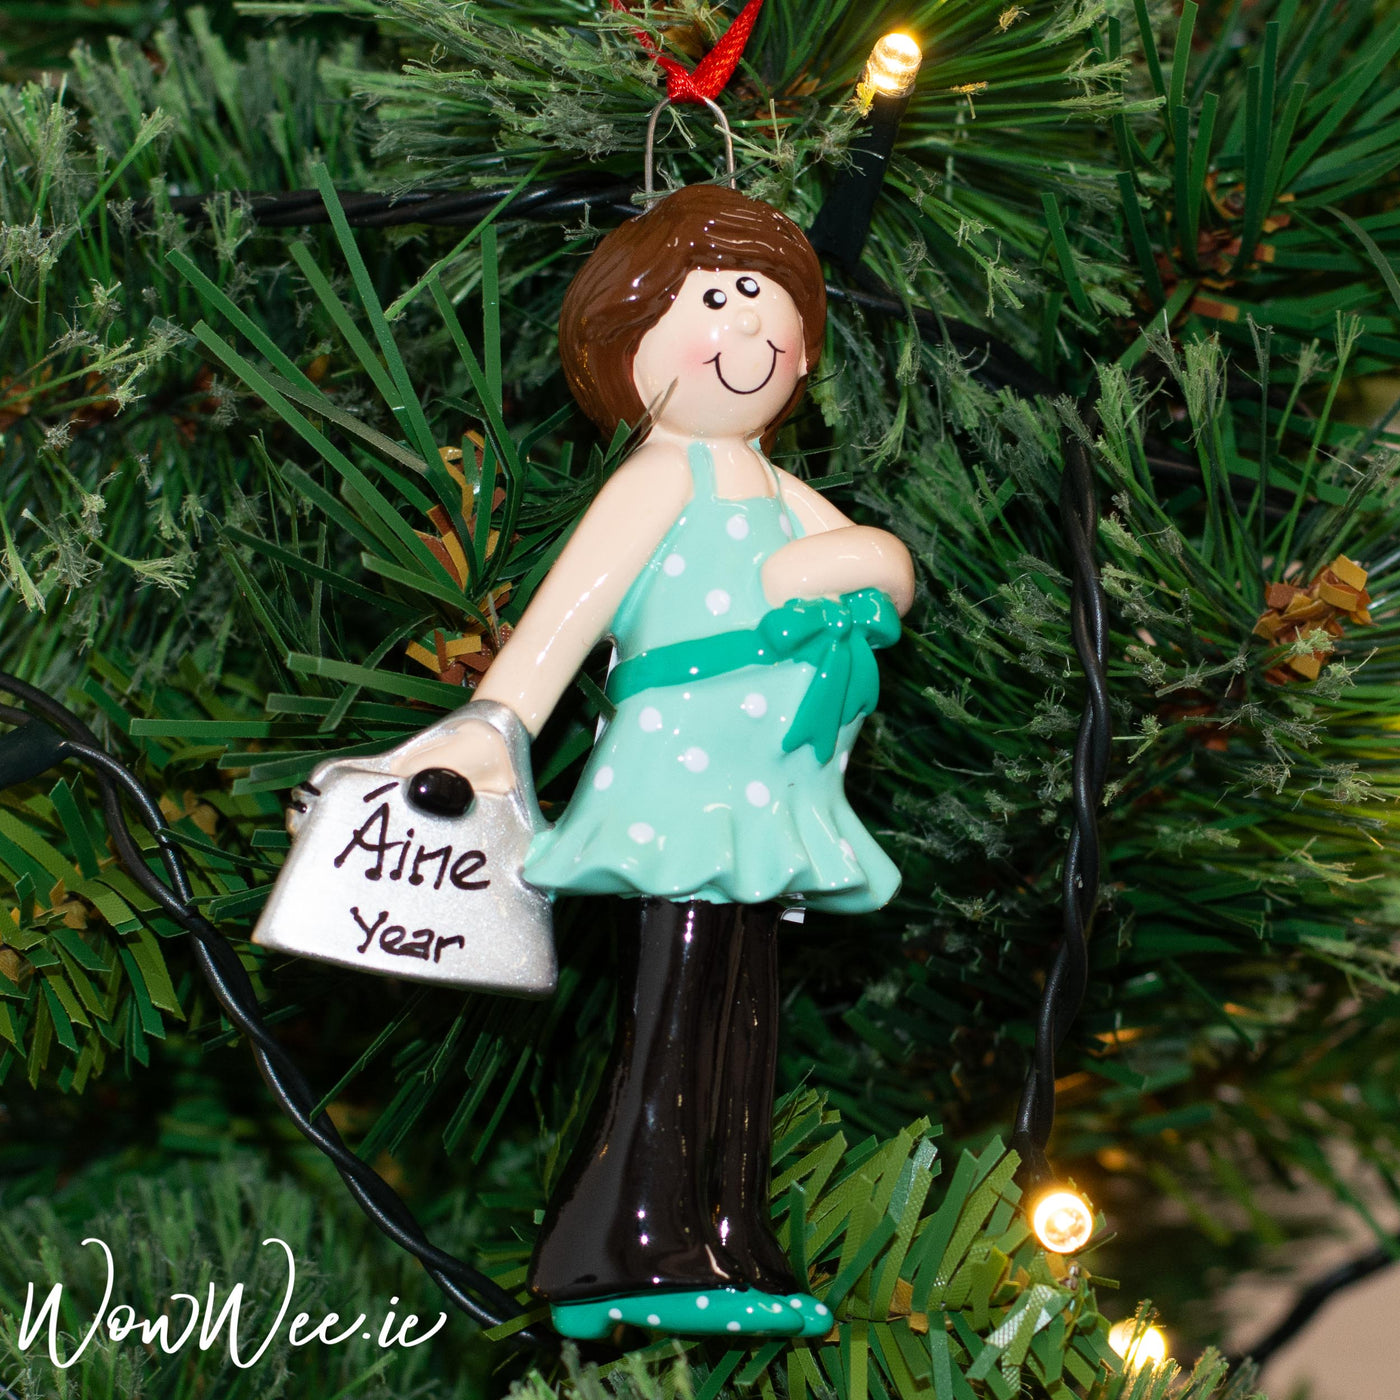 Personalised Christmas Tree Ornament is a lovely way to always remember the Christmas before welcoming a new little arrival and celebrating Baby's 1st Christmas.